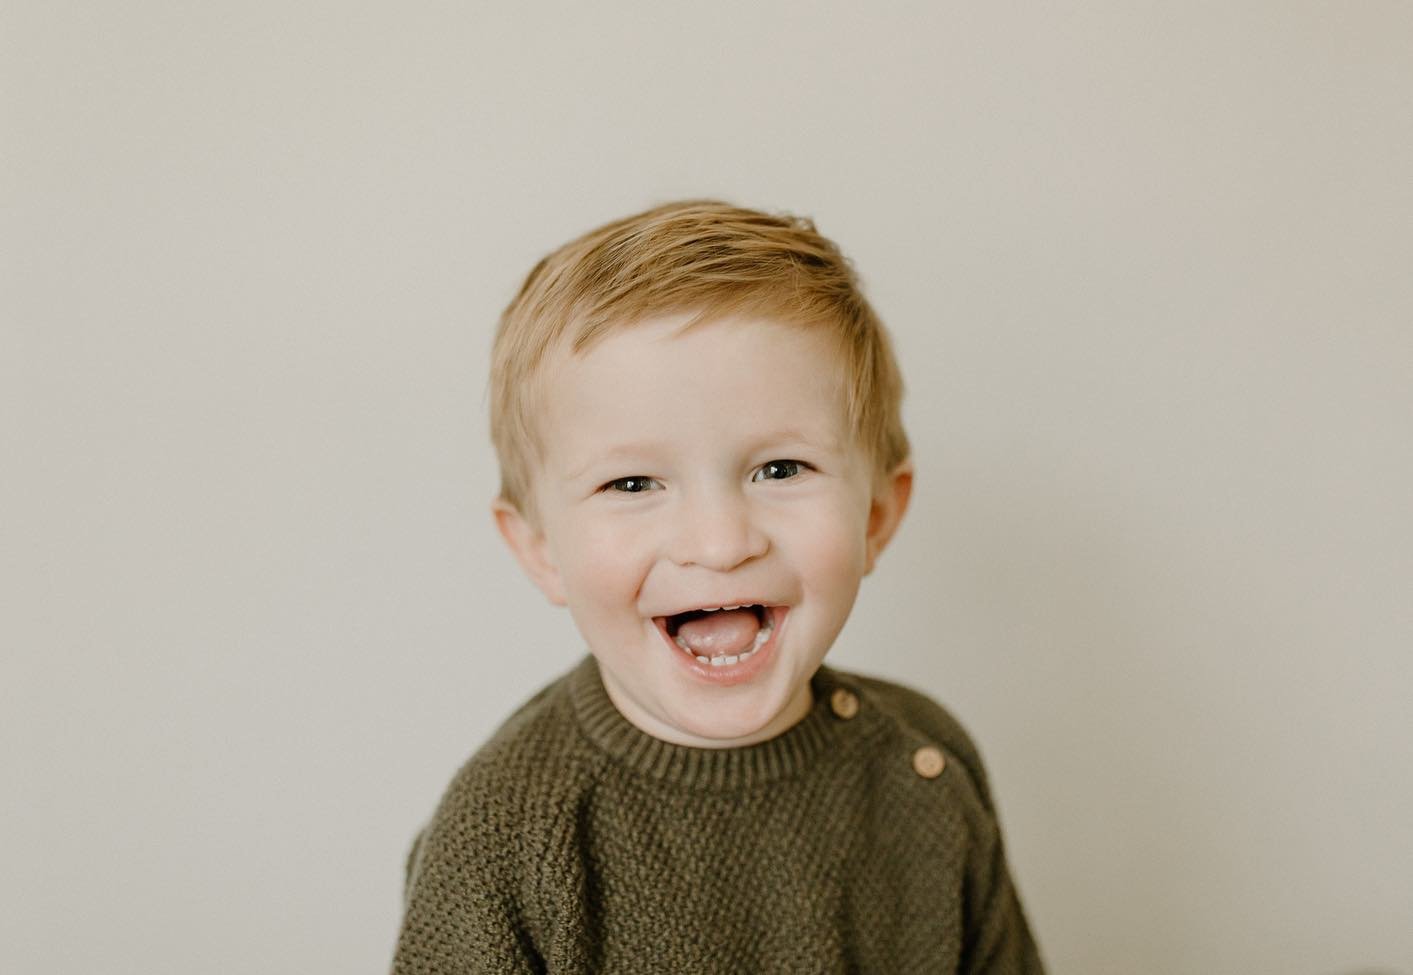 Happy 3rd Birthday to our sweet nephew, Summit! Can&rsquo;t believe you are 3 already! Where does the time go? He is such a sweet, sometimes shy, funny, adventurous little boy! We hope you have the best party today and wish we could be there. We love